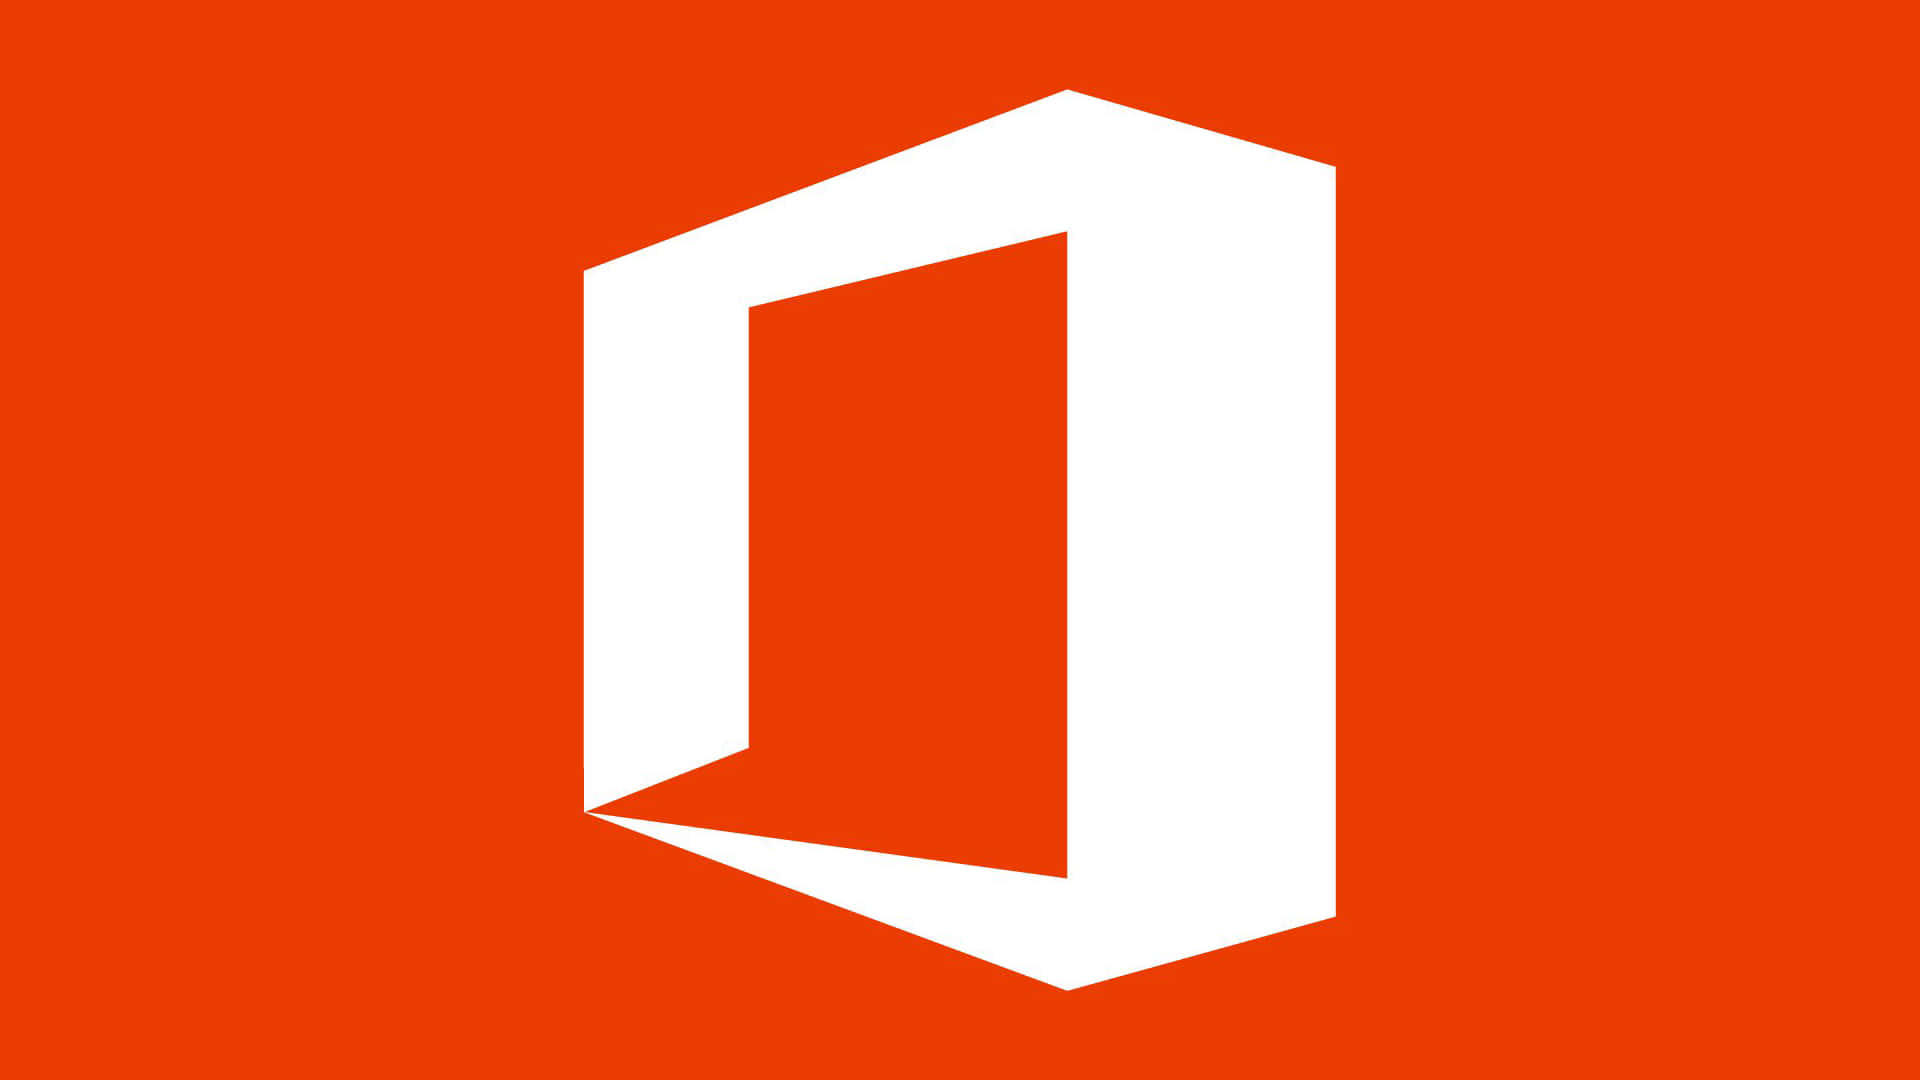 Image  "Embrace the Modern Workplace with Office 365"